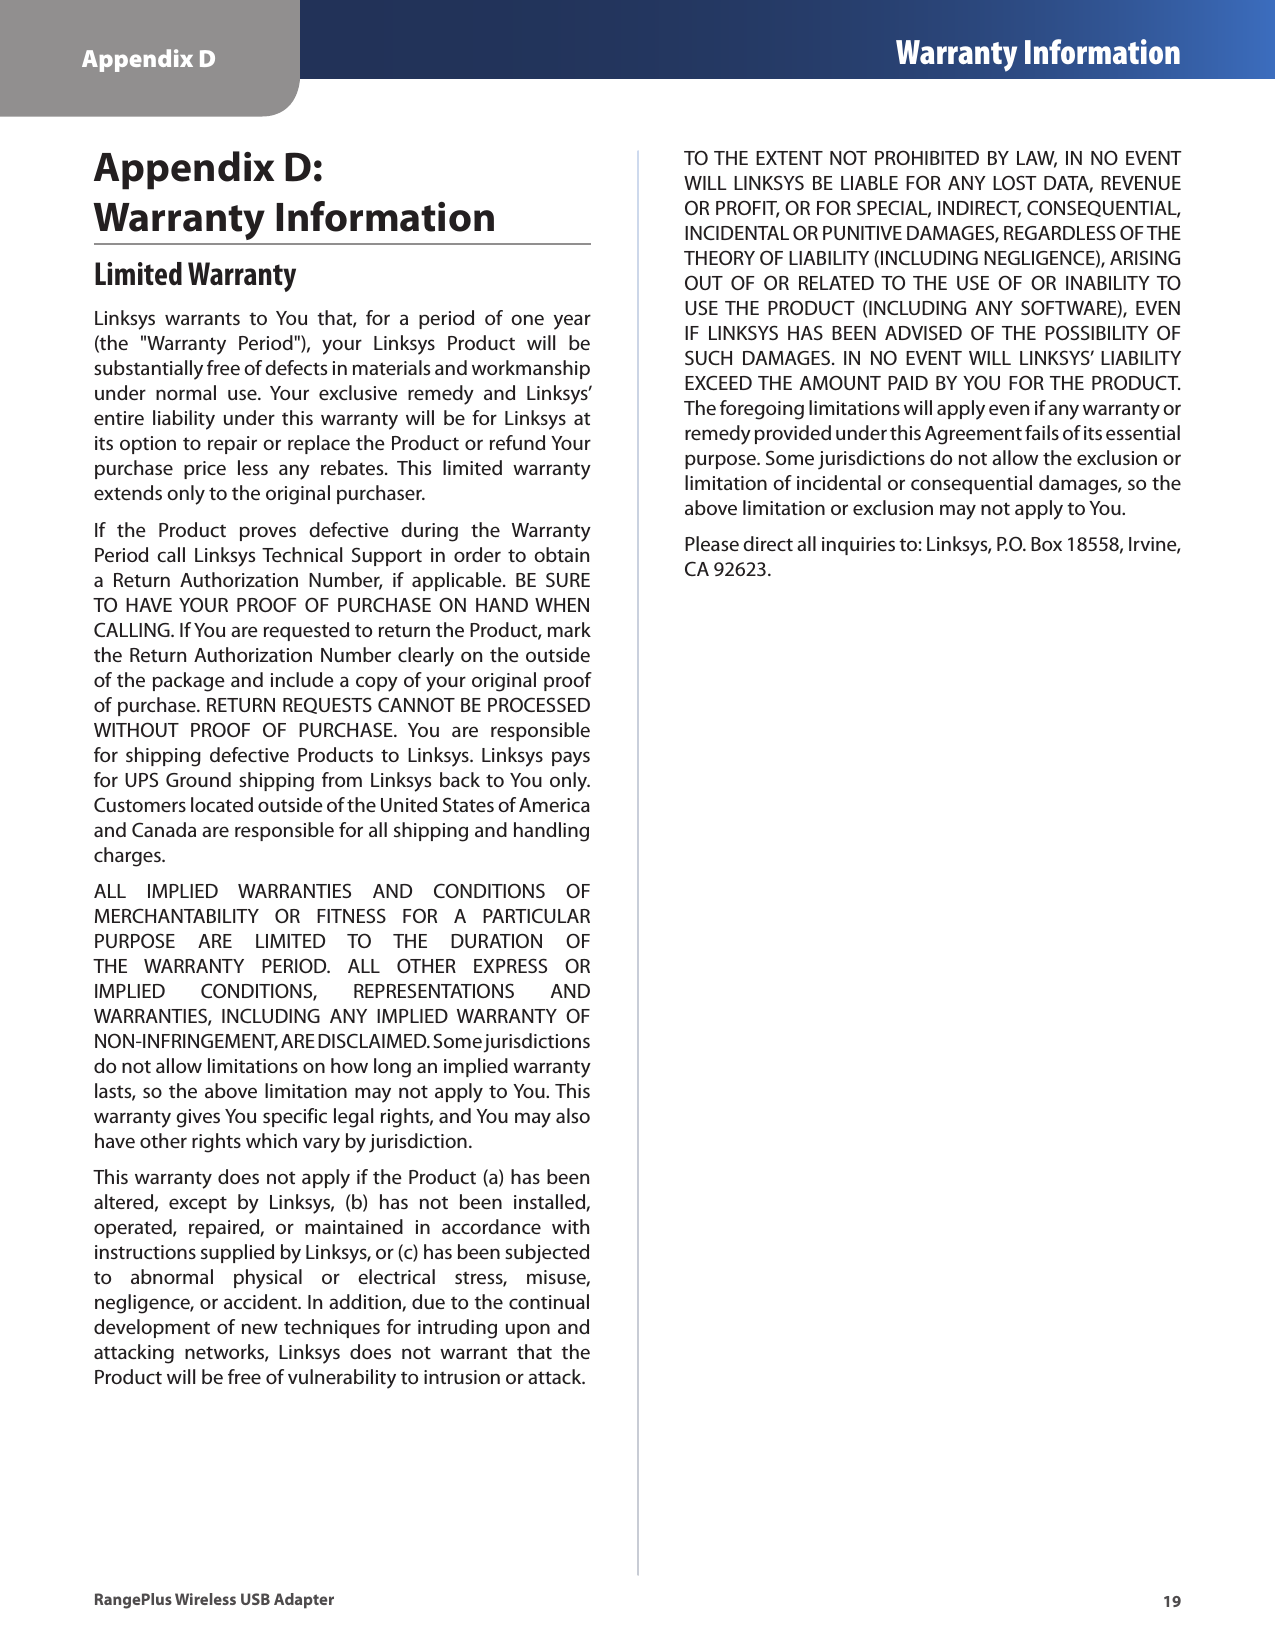 Appendix D Warranty Information19RangePlus Wireless USB AdapterLimited WarrantyLinksys  warrants  to  You  that,  for  a  period  of  one  year (the  &quot;Warranty  Period&quot;),  your  Linksys  Product  will  be substantially free of defects in materials and workmanship under  normal  use.  Your  exclusive  remedy  and  Linksys’ entire liability  under  this  warranty  will  be  for  Linksys  at its option to repair or replace the Product or refund Your purchase  price  less  any  rebates.  This  limited  warranty extends only to the original purchaser. If  the  Product  proves  defective  during  the  Warranty Period call  Linksys Technical  Support  in  order  to  obtain a  Return  Authorization  Number,  if  applicable.  BE  SURE TO  HAVE YOUR  PROOF  OF  PURCHASE  ON  HAND WHEN CALLING. If You are requested to return the Product, mark the Return Authorization Number clearly on the outside of the package and include a copy of your original proof of purchase. RETURN REQUESTS CANNOT BE PROCESSED WITHOUT  PROOF  OF  PURCHASE.  You  are  responsible for  shipping  defective  Products  to  Linksys.  Linksys  pays for UPS Ground shipping from Linksys back to You only. Customers located outside of the United States of America and Canada are responsible for all shipping and handling charges. ALL  IMPLIED  WARRANTIES  AND  CONDITIONS  OF MERCHANTABILITY  OR  FITNESS  FOR  A  PARTICULAR PURPOSE  ARE  LIMITED  TO  THE  DURATION  OF THE  WARRANTY  PERIOD.  ALL  OTHER  EXPRESS  OR IMPLIED  CONDITIONS,  REPRESENTATIONS  AND WARRANTIES,  INCLUDING  ANY  IMPLIED  WARRANTY  OF NON-INFRINGEMENT, ARE DISCLAIMED. Some jurisdictions do not allow limitations on how long an implied warranty lasts, so the above limitation may not apply to You. This warranty gives You specific legal rights, and You may also have other rights which vary by jurisdiction.This warranty does not apply if the Product (a) has been altered,  except  by  Linksys,  (b)  has  not  been  installed, operated,  repaired,  or  maintained  in  accordance  with instructions supplied by Linksys, or (c) has been subjected to  abnormal  physical  or  electrical  stress,  misuse, negligence, or accident. In addition, due to the continual development of new techniques for intruding upon and attacking  networks,  Linksys  does  not  warrant  that  the Product will be free of vulnerability to intrusion or attack.TO THE  EXTENT NOT PROHIBITED BY LAW, IN NO EVENT WILL LINKSYS BE LIABLE FOR ANY LOST DATA, REVENUE OR PROFIT, OR FOR SPECIAL, INDIRECT, CONSEQUENTIAL, INCIDENTAL OR PUNITIVE DAMAGES, REGARDLESS OF THE THEORY OF LIABILITY (INCLUDING NEGLIGENCE), ARISING OUT  OF  OR  RELATED  TO  THE  USE  OF  OR  INABILITY  TO USE THE  PRODUCT  (INCLUDING  ANY  SOFTWARE),  EVEN IF  LINKSYS  HAS  BEEN  ADVISED  OF  THE  POSSIBILITY  OF SUCH  DAMAGES.  IN  NO  EVENT  WILL  LINKSYS’  LIABILITY EXCEED THE  AMOUNT PAID BY YOU FOR THE  PRODUCT. The foregoing limitations will apply even if any warranty or remedy provided under this Agreement fails of its essential purpose. Some jurisdictions do not allow the exclusion or limitation of incidental or consequential damages, so the above limitation or exclusion may not apply to You.Please direct all inquiries to: Linksys, P.O. Box 18558, Irvine, CA 92623.Appendix D:  Warranty Information